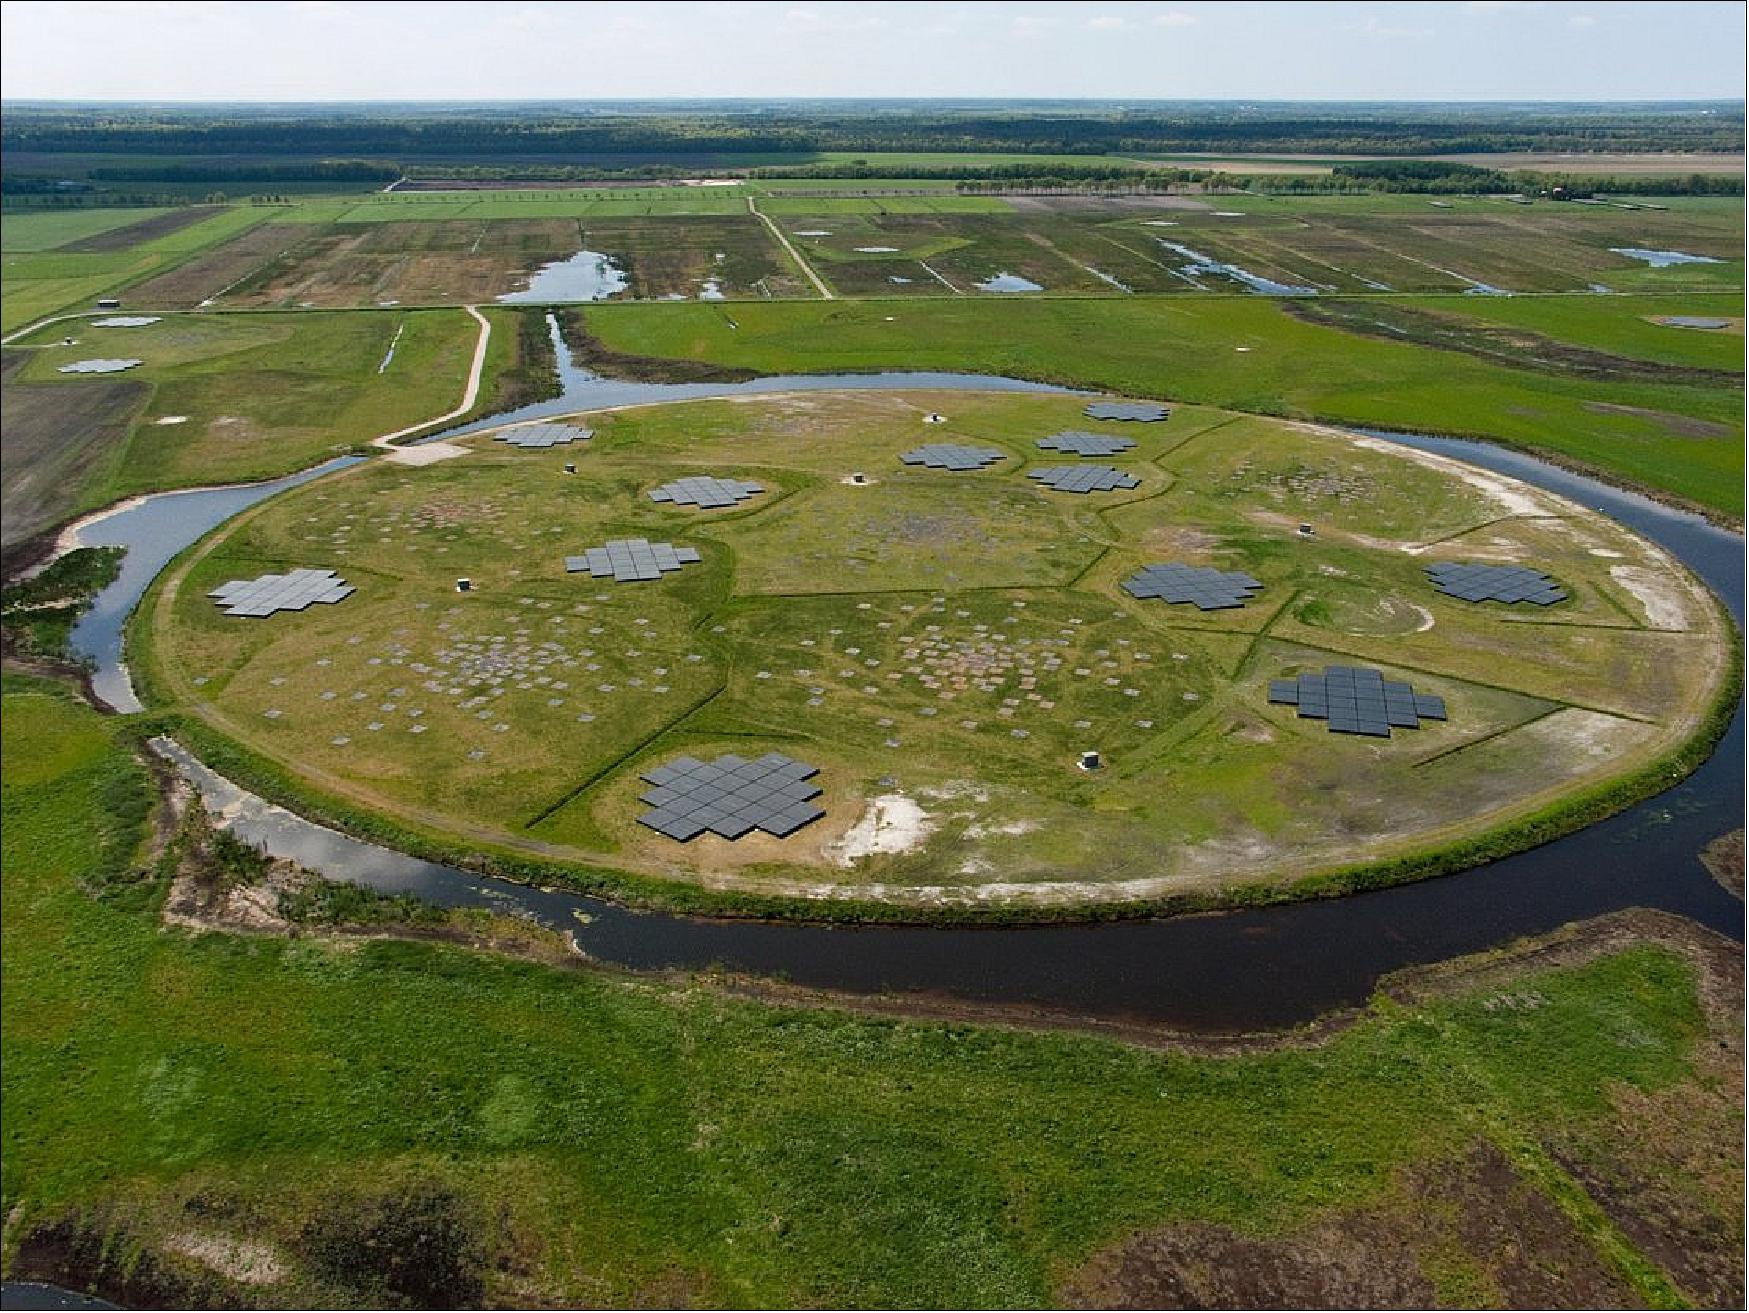 Figure 1: Aerial photograph of the Superterp, the heart of the LOFAR core, on which six LOFAR stations are housed. What resembles at first an ancient earthwork in a nature reserve in the northeast of the Netherlands is actually the heart of the most advanced radio telescope in the world, spanning northwestern Europe. The LOFAR, operated by the Astron Netherlands Institute for Radio Astronomy, consists of 51 antenna stations from Sweden to Ireland and Poland tasked with studying some of the lowest frequencies that can be observed from Earth, probing the primordial era before stars and galaxies were formed (image credit: LOFAR/Astron) 6)